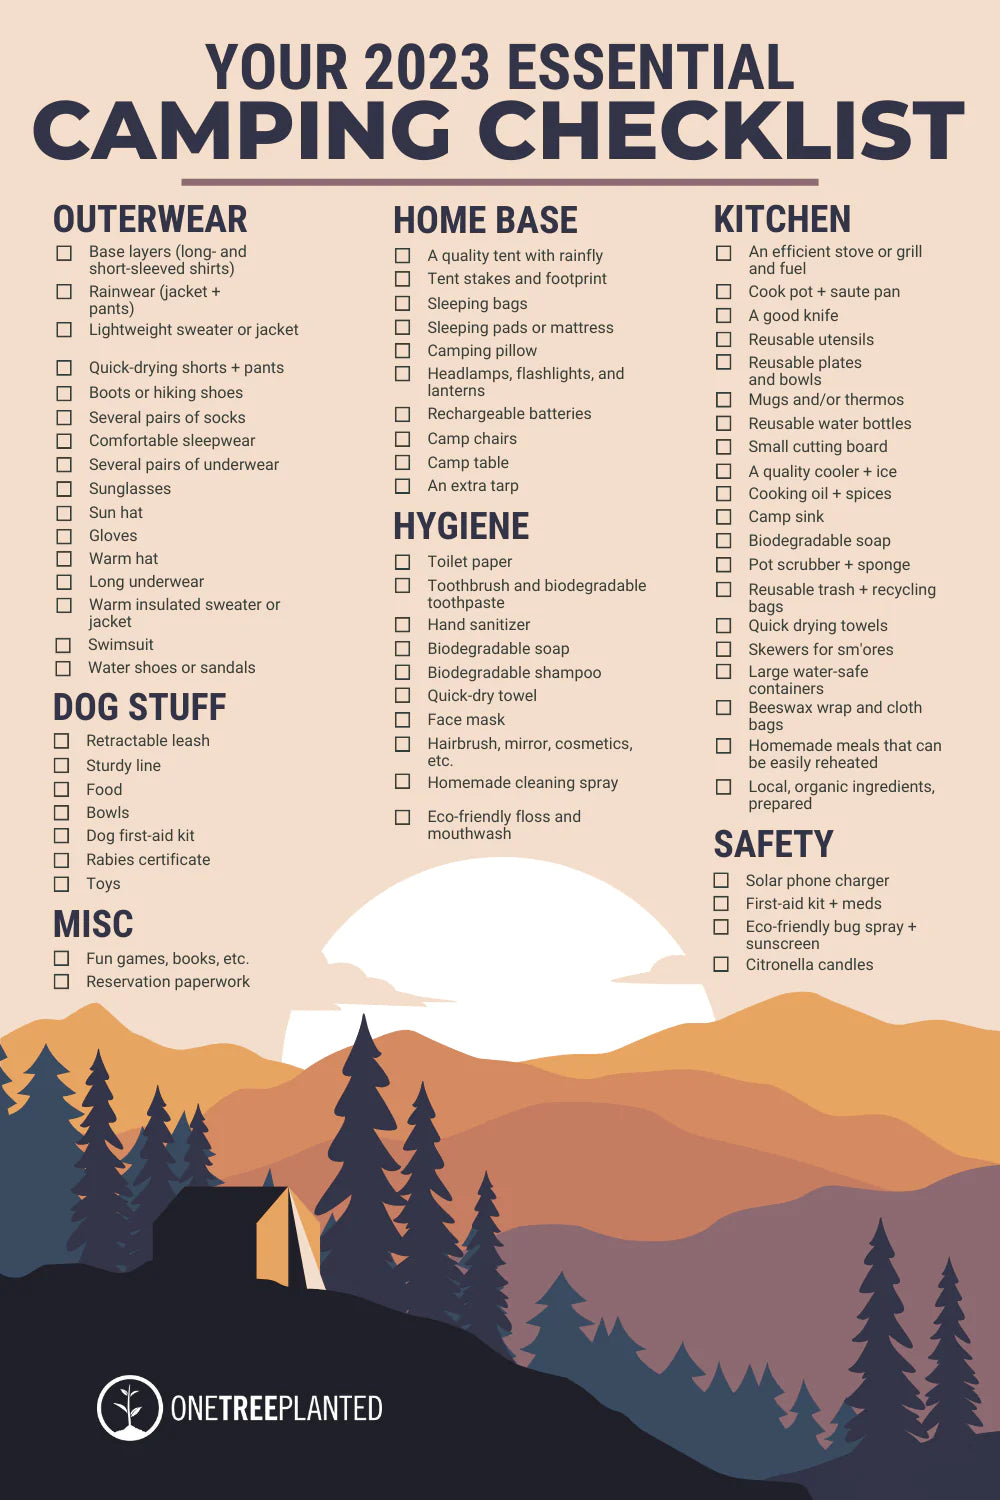 Your 2023 Essential Camping Checklist and Sustainable Camping